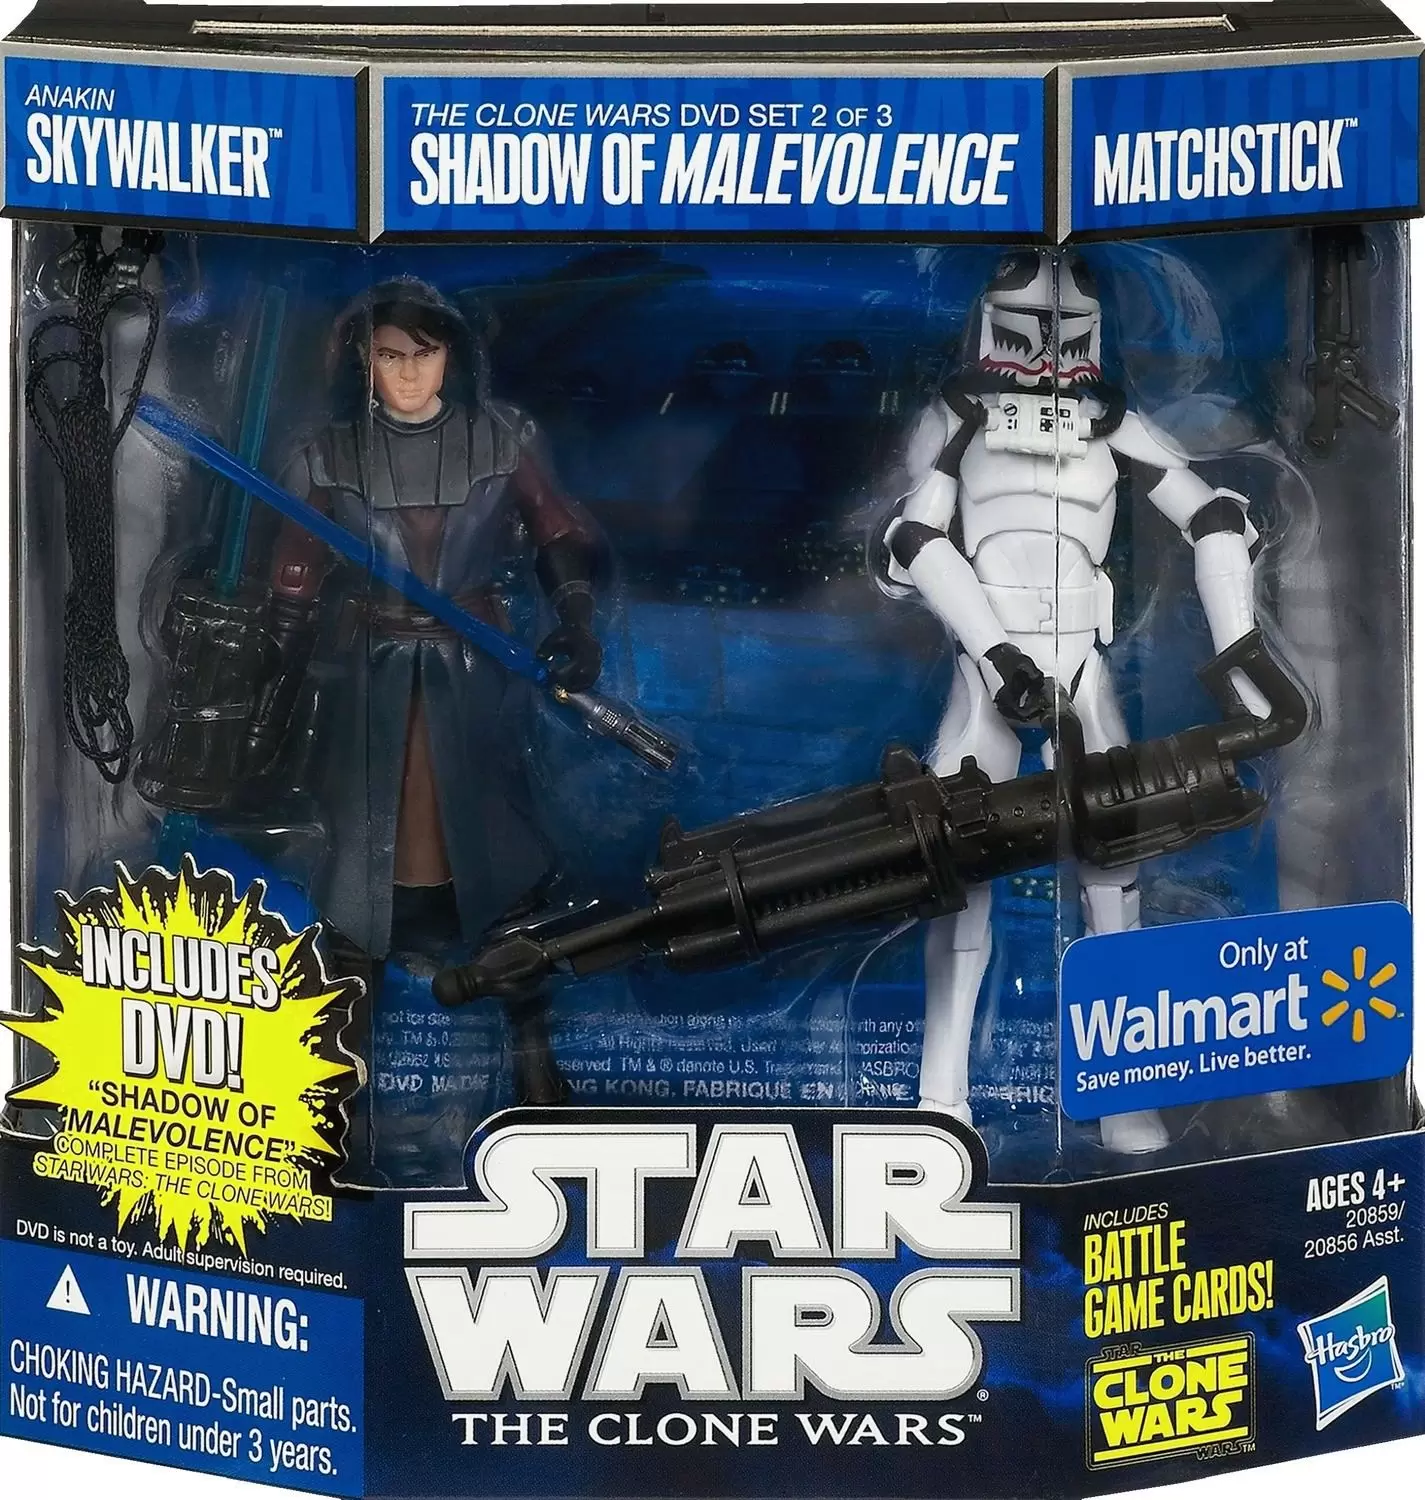 The Clone Wars - Shadow of the Dark Side - THE CLONE WARS DVD SET 2 of 3 SHADOW OF MALEVOLENCE